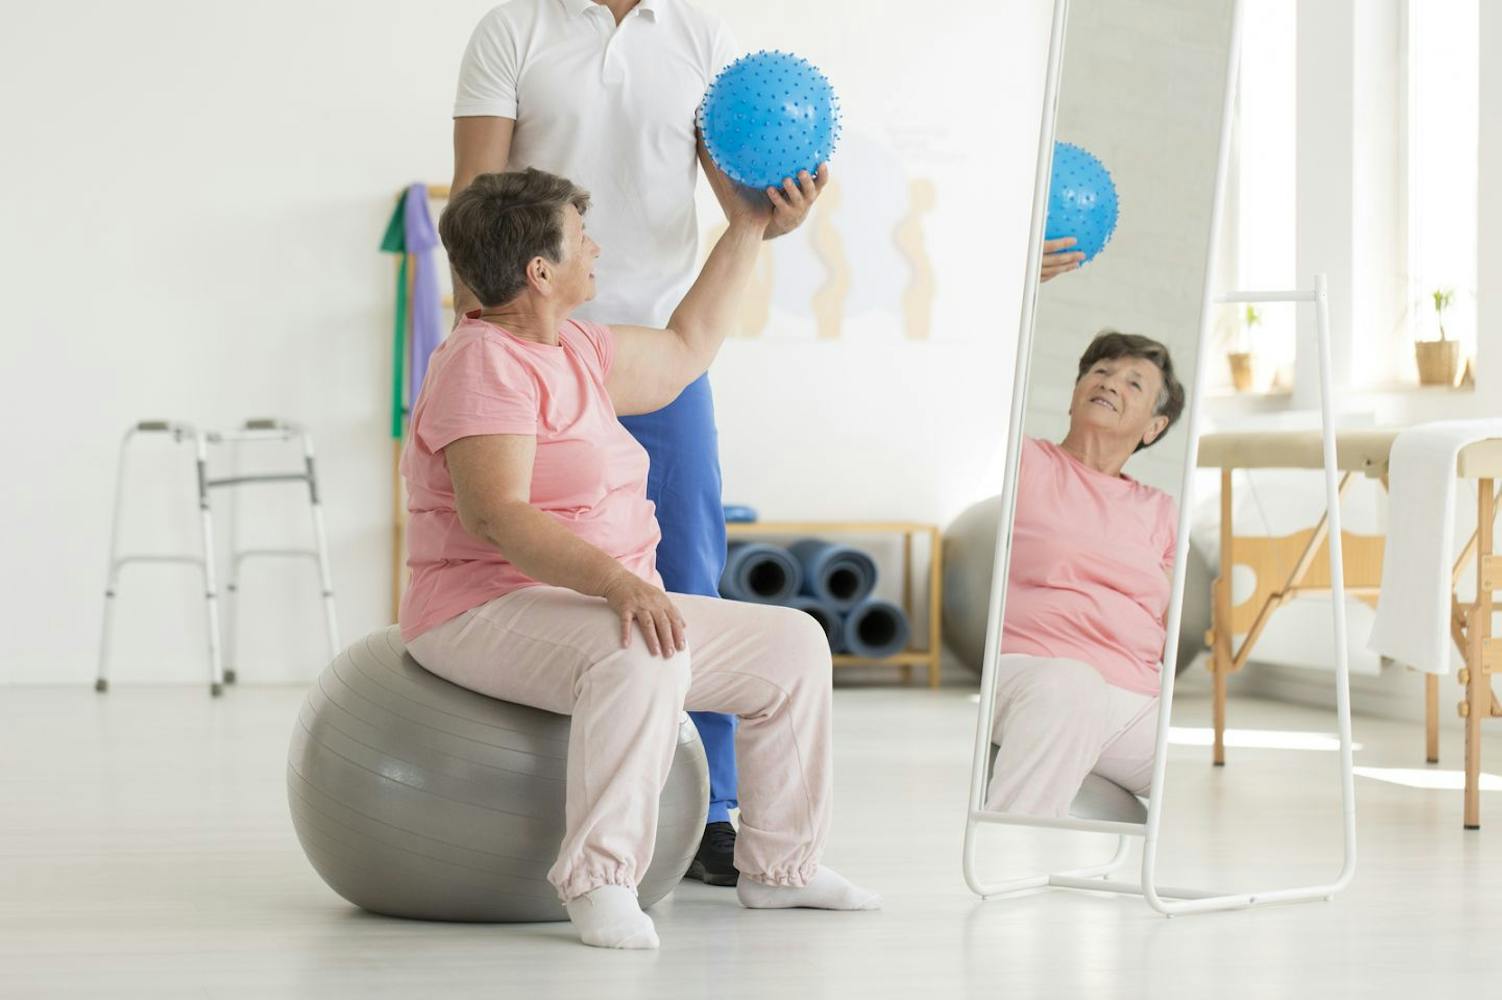 BECOMING A PHYSICAL THERAPIST  Balance Physical Therapy 